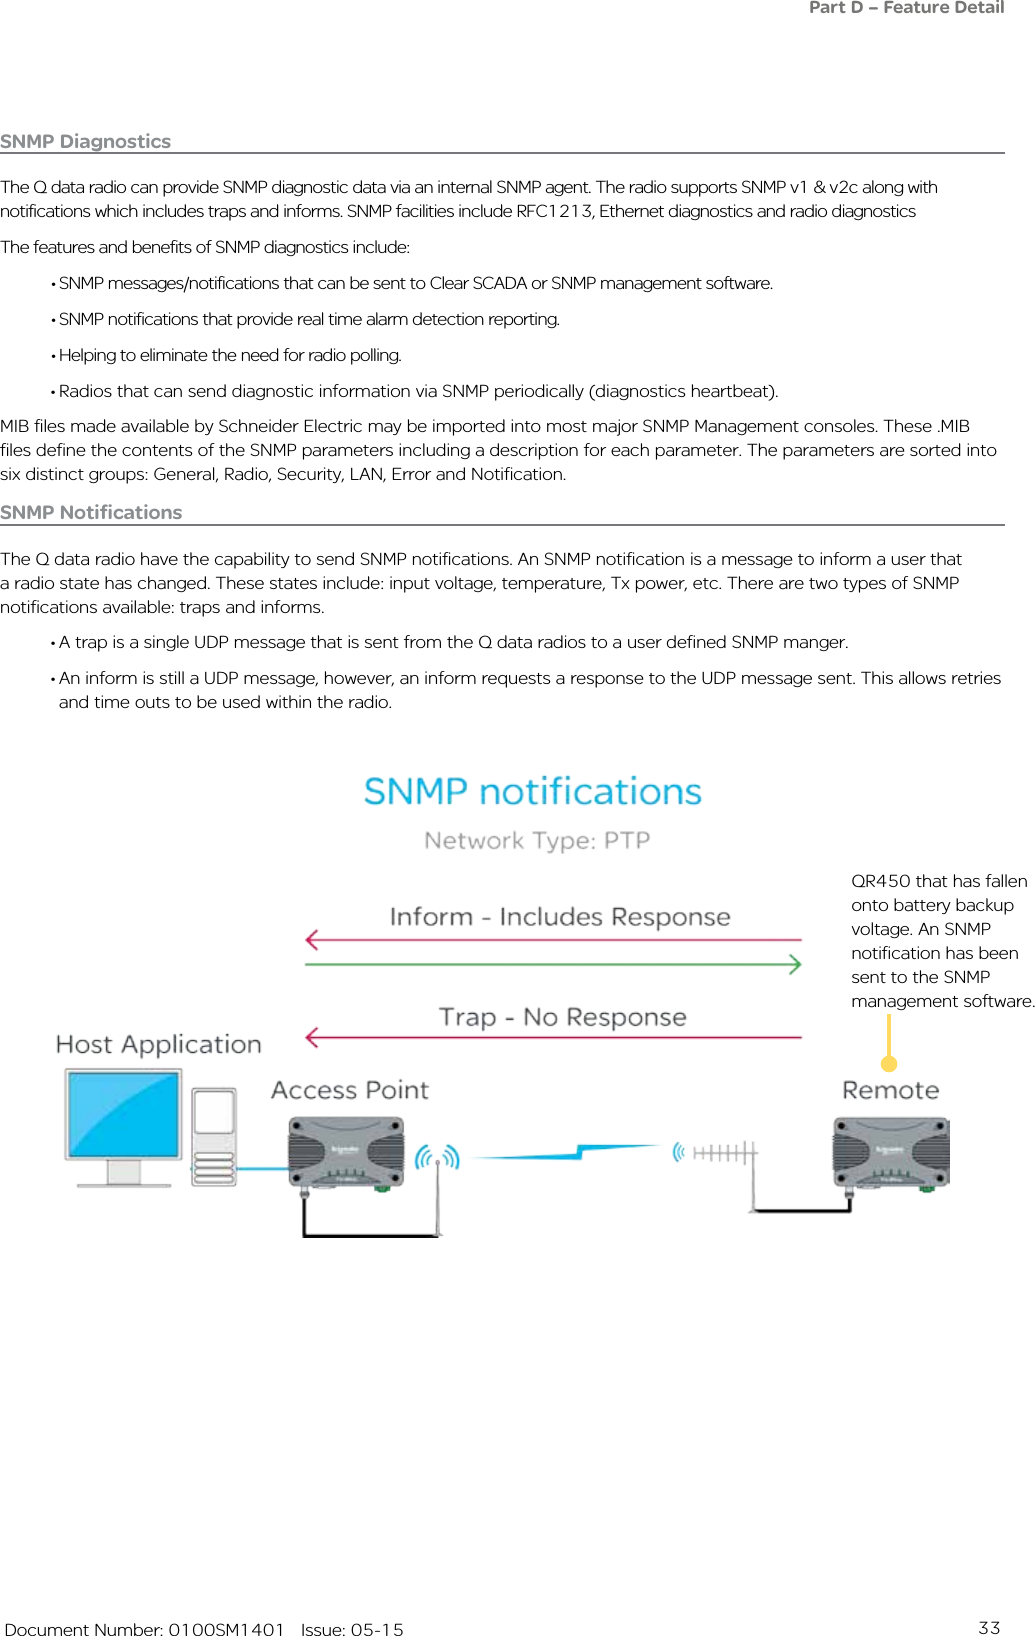 33   Document Number: 0100SM1401   Issue: 05-15SNMP DiagnosticsThe Q data radio can provide SNMP diagnostic data via an internal SNMP agent. The radio supports SNMP v1 &amp; v2c along with notifications which includes traps and informs. SNMP facilities include RFC1213, Ethernet diagnostics and radio diagnosticsThe features and benefits of SNMP diagnostics include:• SNMP messages/notifications that can be sent to Clear SCADA or SNMP management software.• SNMP notifications that provide real time alarm detection reporting.• Helping to eliminate the need for radio polling.• Radios that can send diagnostic information via SNMP periodically (diagnostics heartbeat).MIB files made available by Schneider Electric may be imported into most major SNMP Management consoles. These .MIB files define the contents of the SNMP parameters including a description for each parameter. The parameters are sorted into six distinct groups: General, Radio, Security, LAN, Error and Notification.SNMP NotificationsThe Q data radio have the capability to send SNMP notifications. An SNMP notification is a message to inform a user that a radio state has changed. These states include: input voltage, temperature, Tx power, etc. There are two types of SNMP notifications available: traps and informs.• A trap is a single UDP message that is sent from the Q data radios to a user defined SNMP manger. • An inform is still a UDP message, however, an inform requests a response to the UDP message sent. This allows retries and time outs to be used within the radio. QR450 that has fallen onto battery backup voltage. An SNMP notification has been sent to the SNMP management software.Part D – Feature Detail